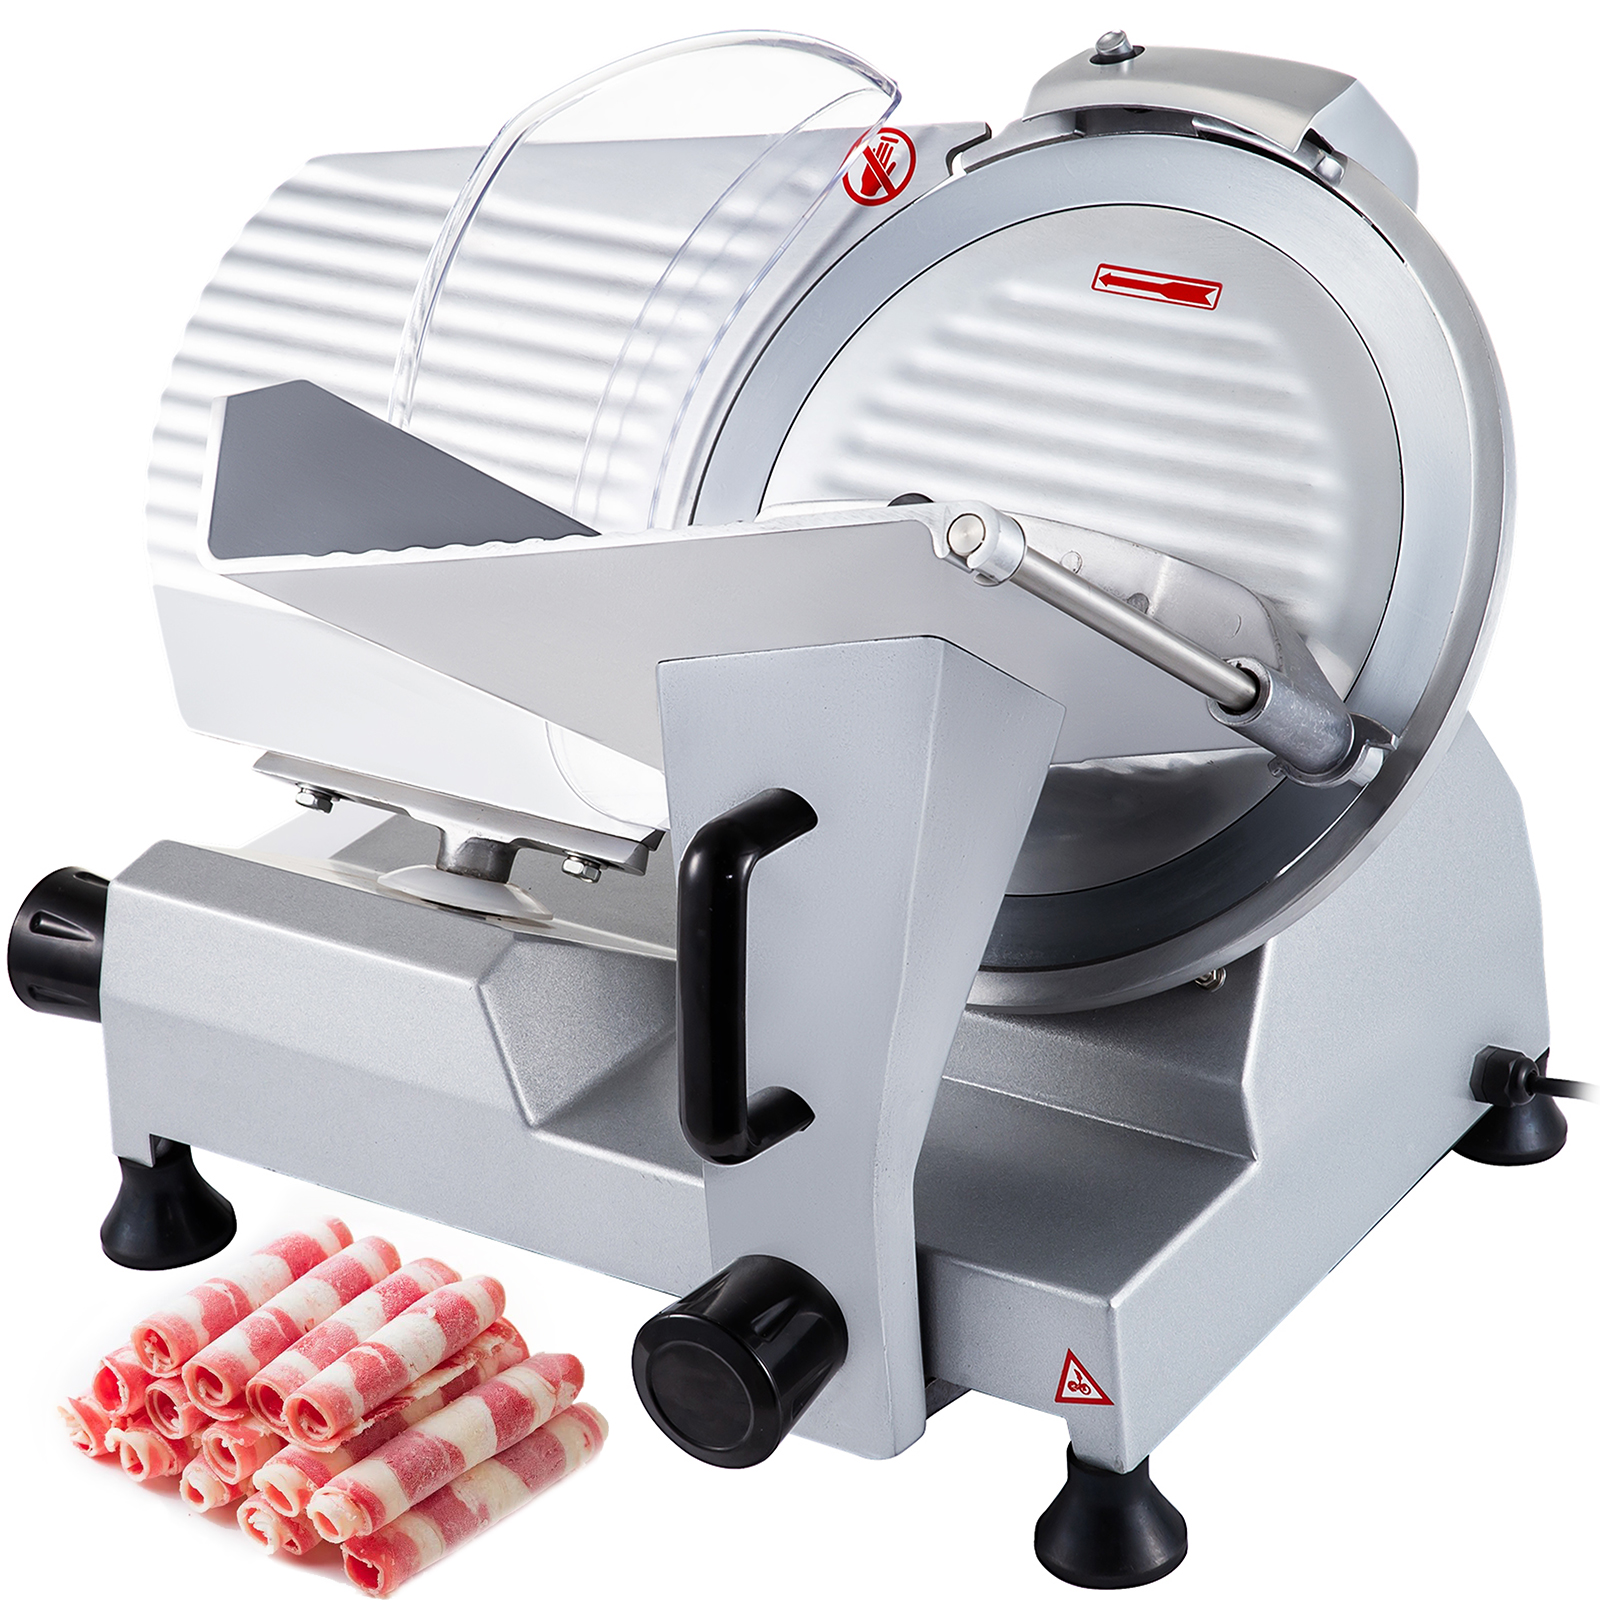 Stainless Steel Handheld Manual Frozen Meat Slicer Beef Slicing Cutting  Machine